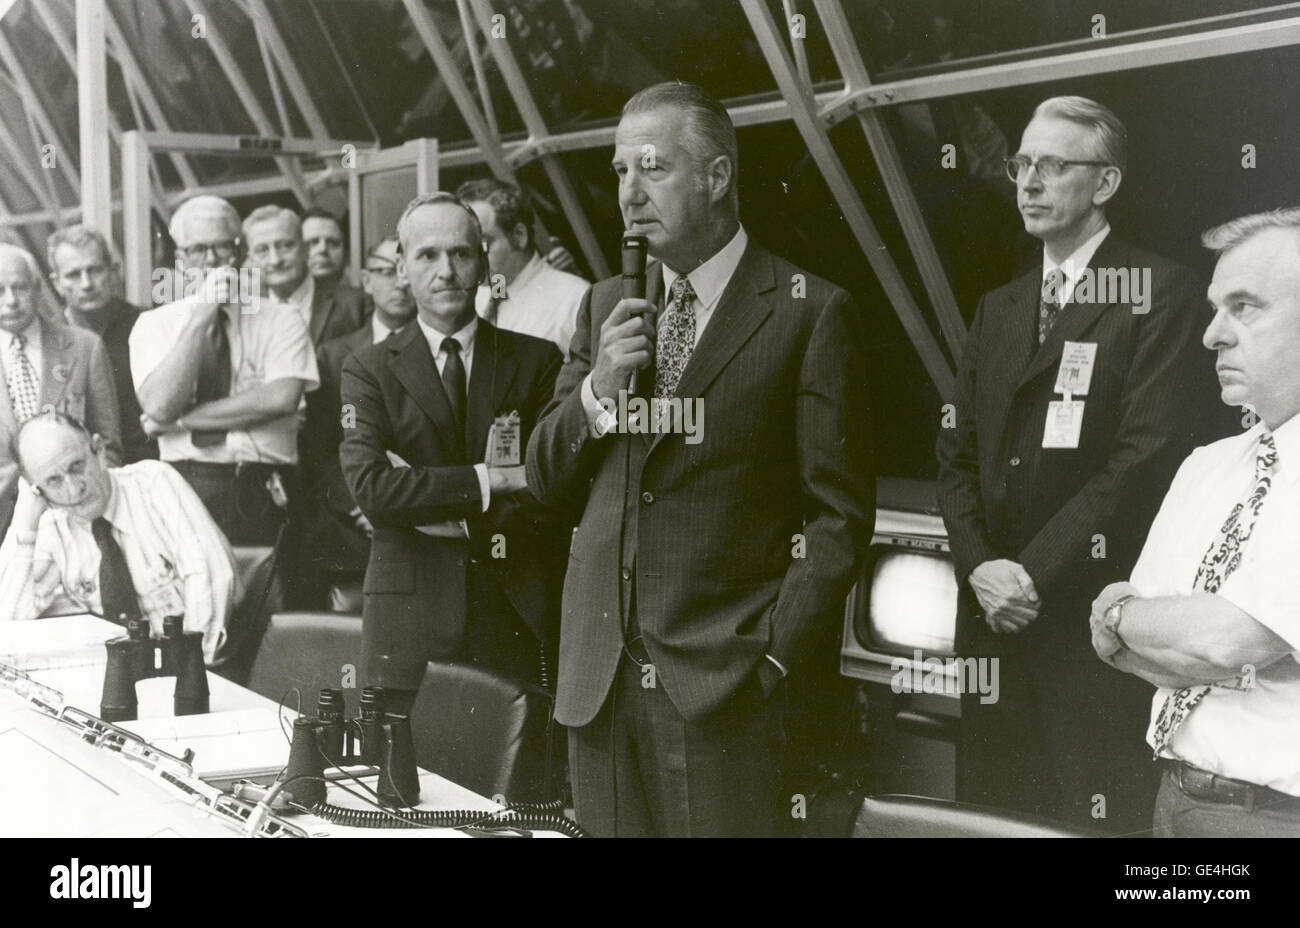 Vice President Spiro T. Agnew congratulates launch team personnel, in firing room #1 of launch control minutes after the successful launch of Apollo 17 from Complex 39-A at 12:33 am EST, December 7, 1972, with astronauts Eugene A. Cernan, Ronald E. Evans, and Harrison H. Schmitt aboard. Apollo 17, NASA's sixth and final manned lunar landing mission in the Apollo program, landed within 200 feet of the targeted point in the Taurus-Littrow landing site on the lunar surface at 2:55 pm EST on December 11, 1972.   Image # : 72-H-1538 Stock Photo